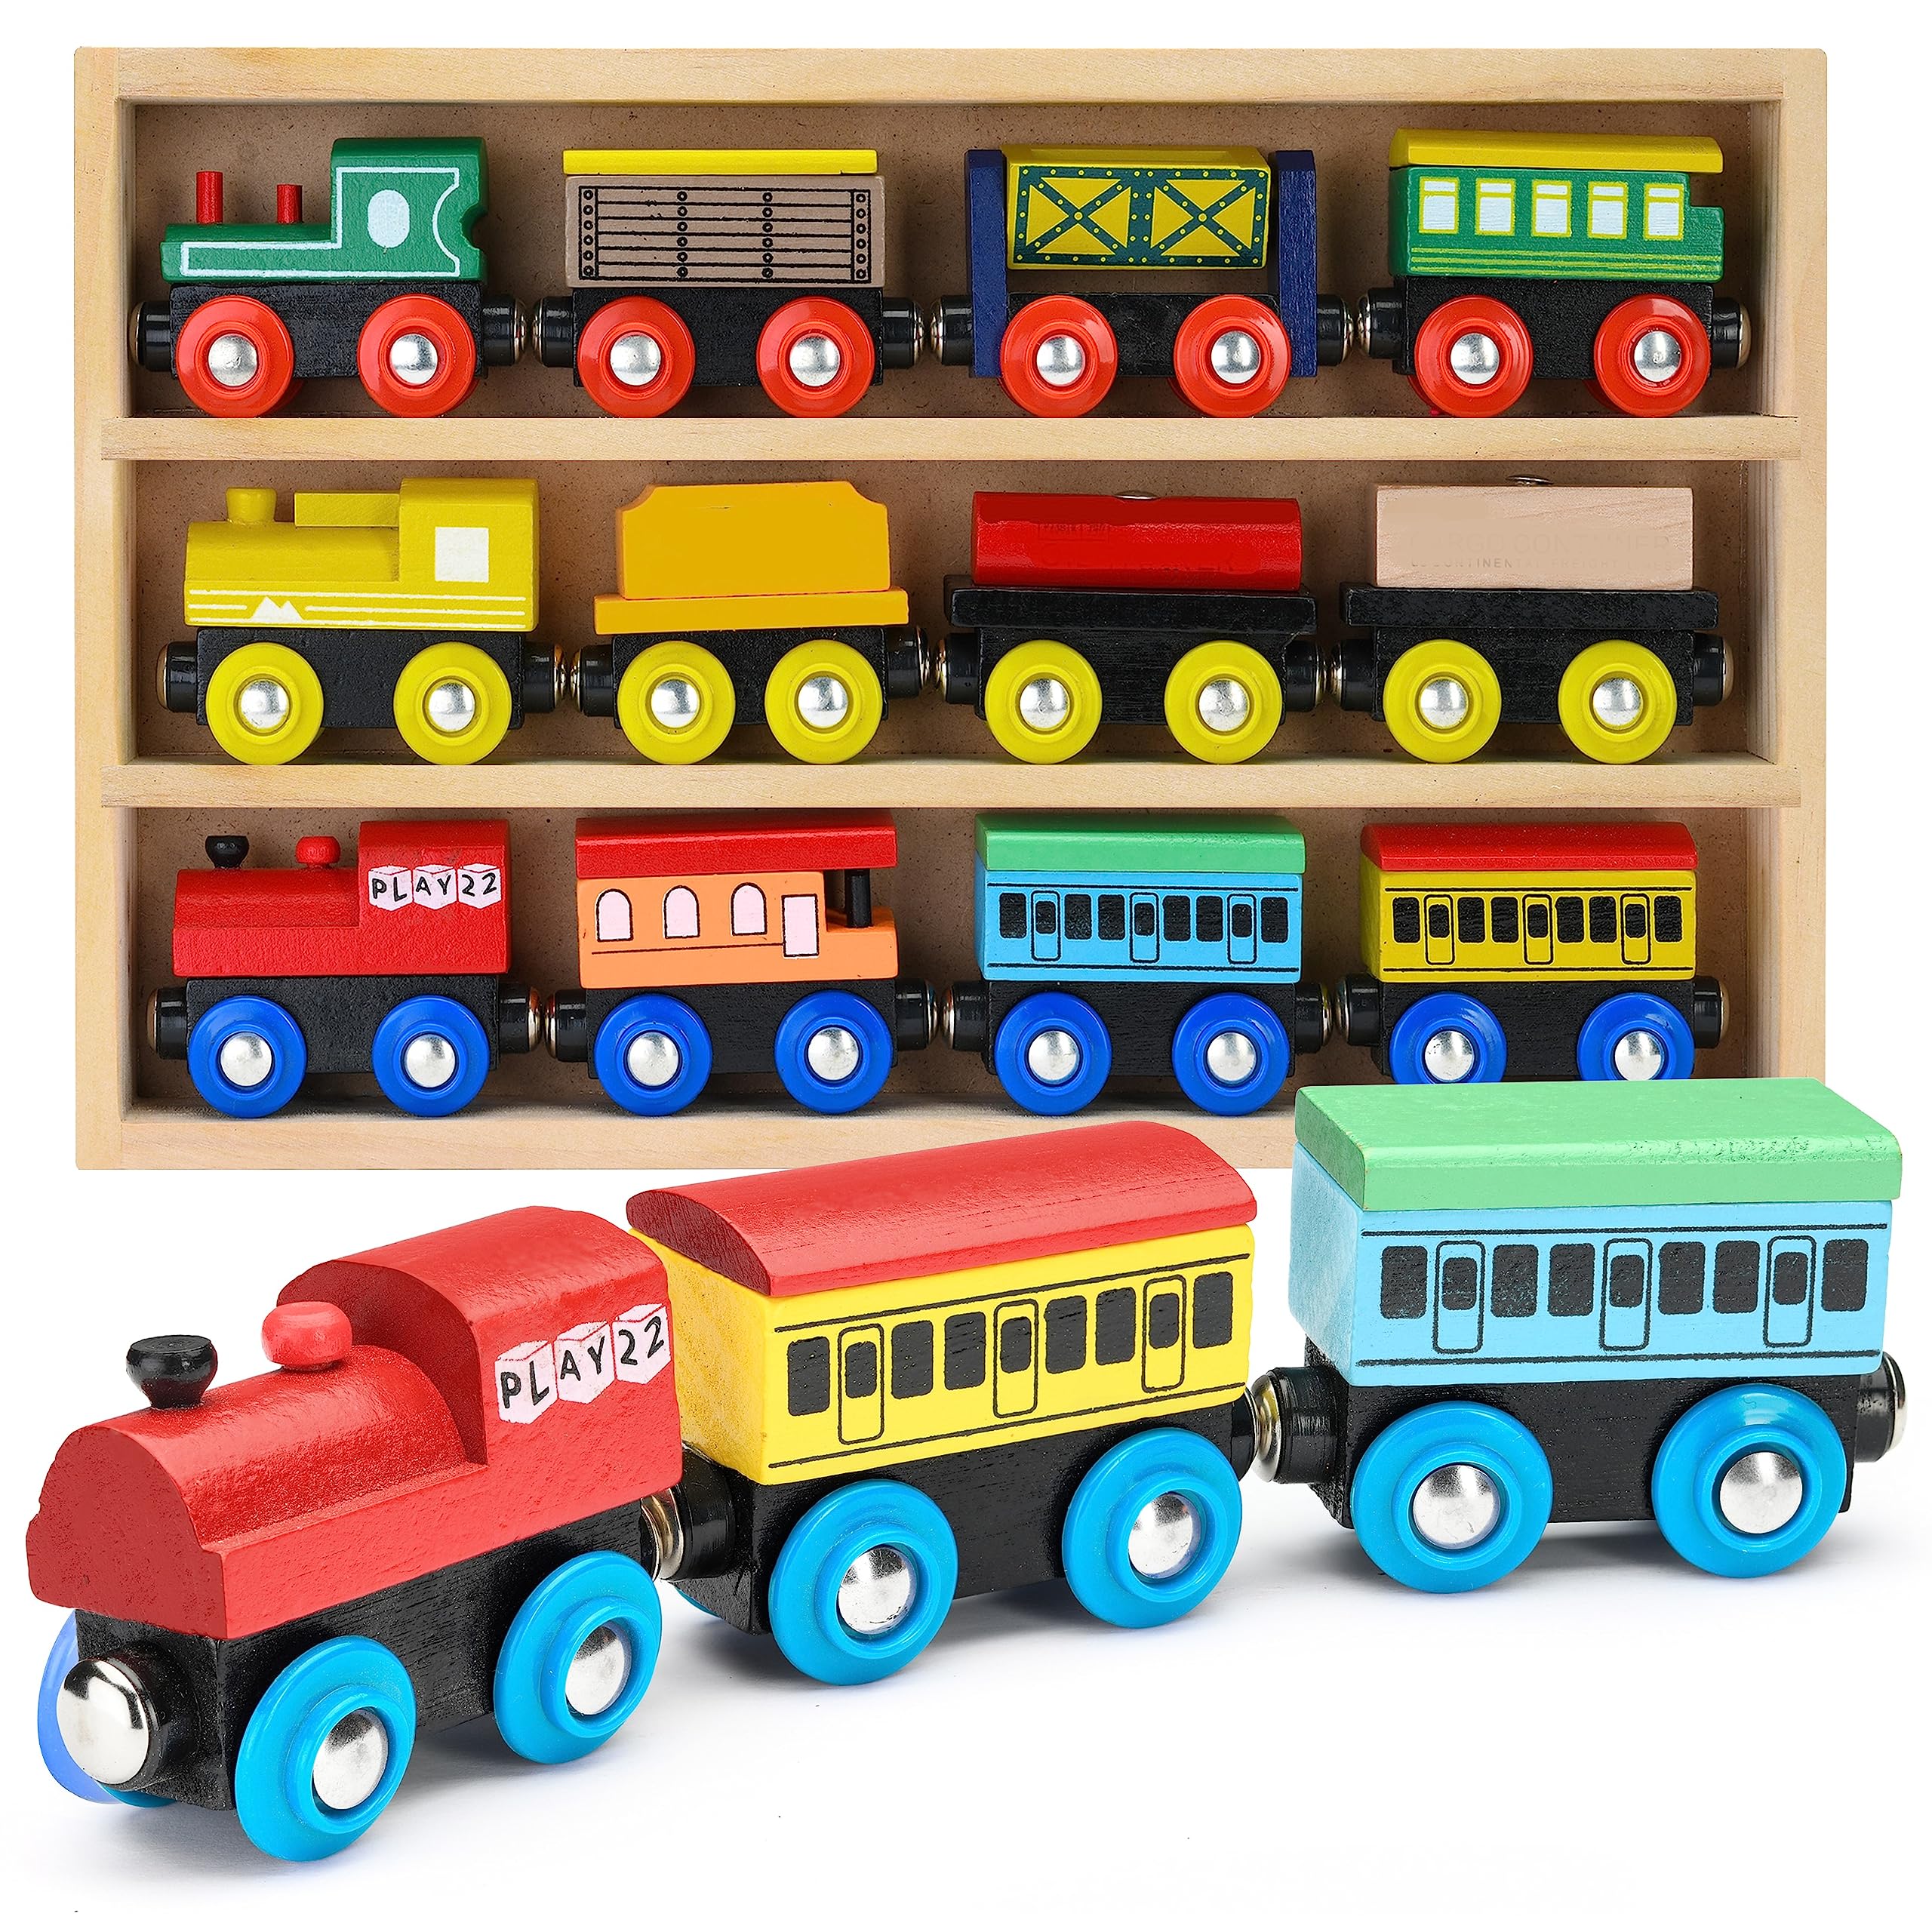 Play22 Wooden Train Set 12 PCS - Train Toys Magnetic Set Includes 3 Engines - Toy Train Sets For Kids Toddler Boys And Girls - Compatib